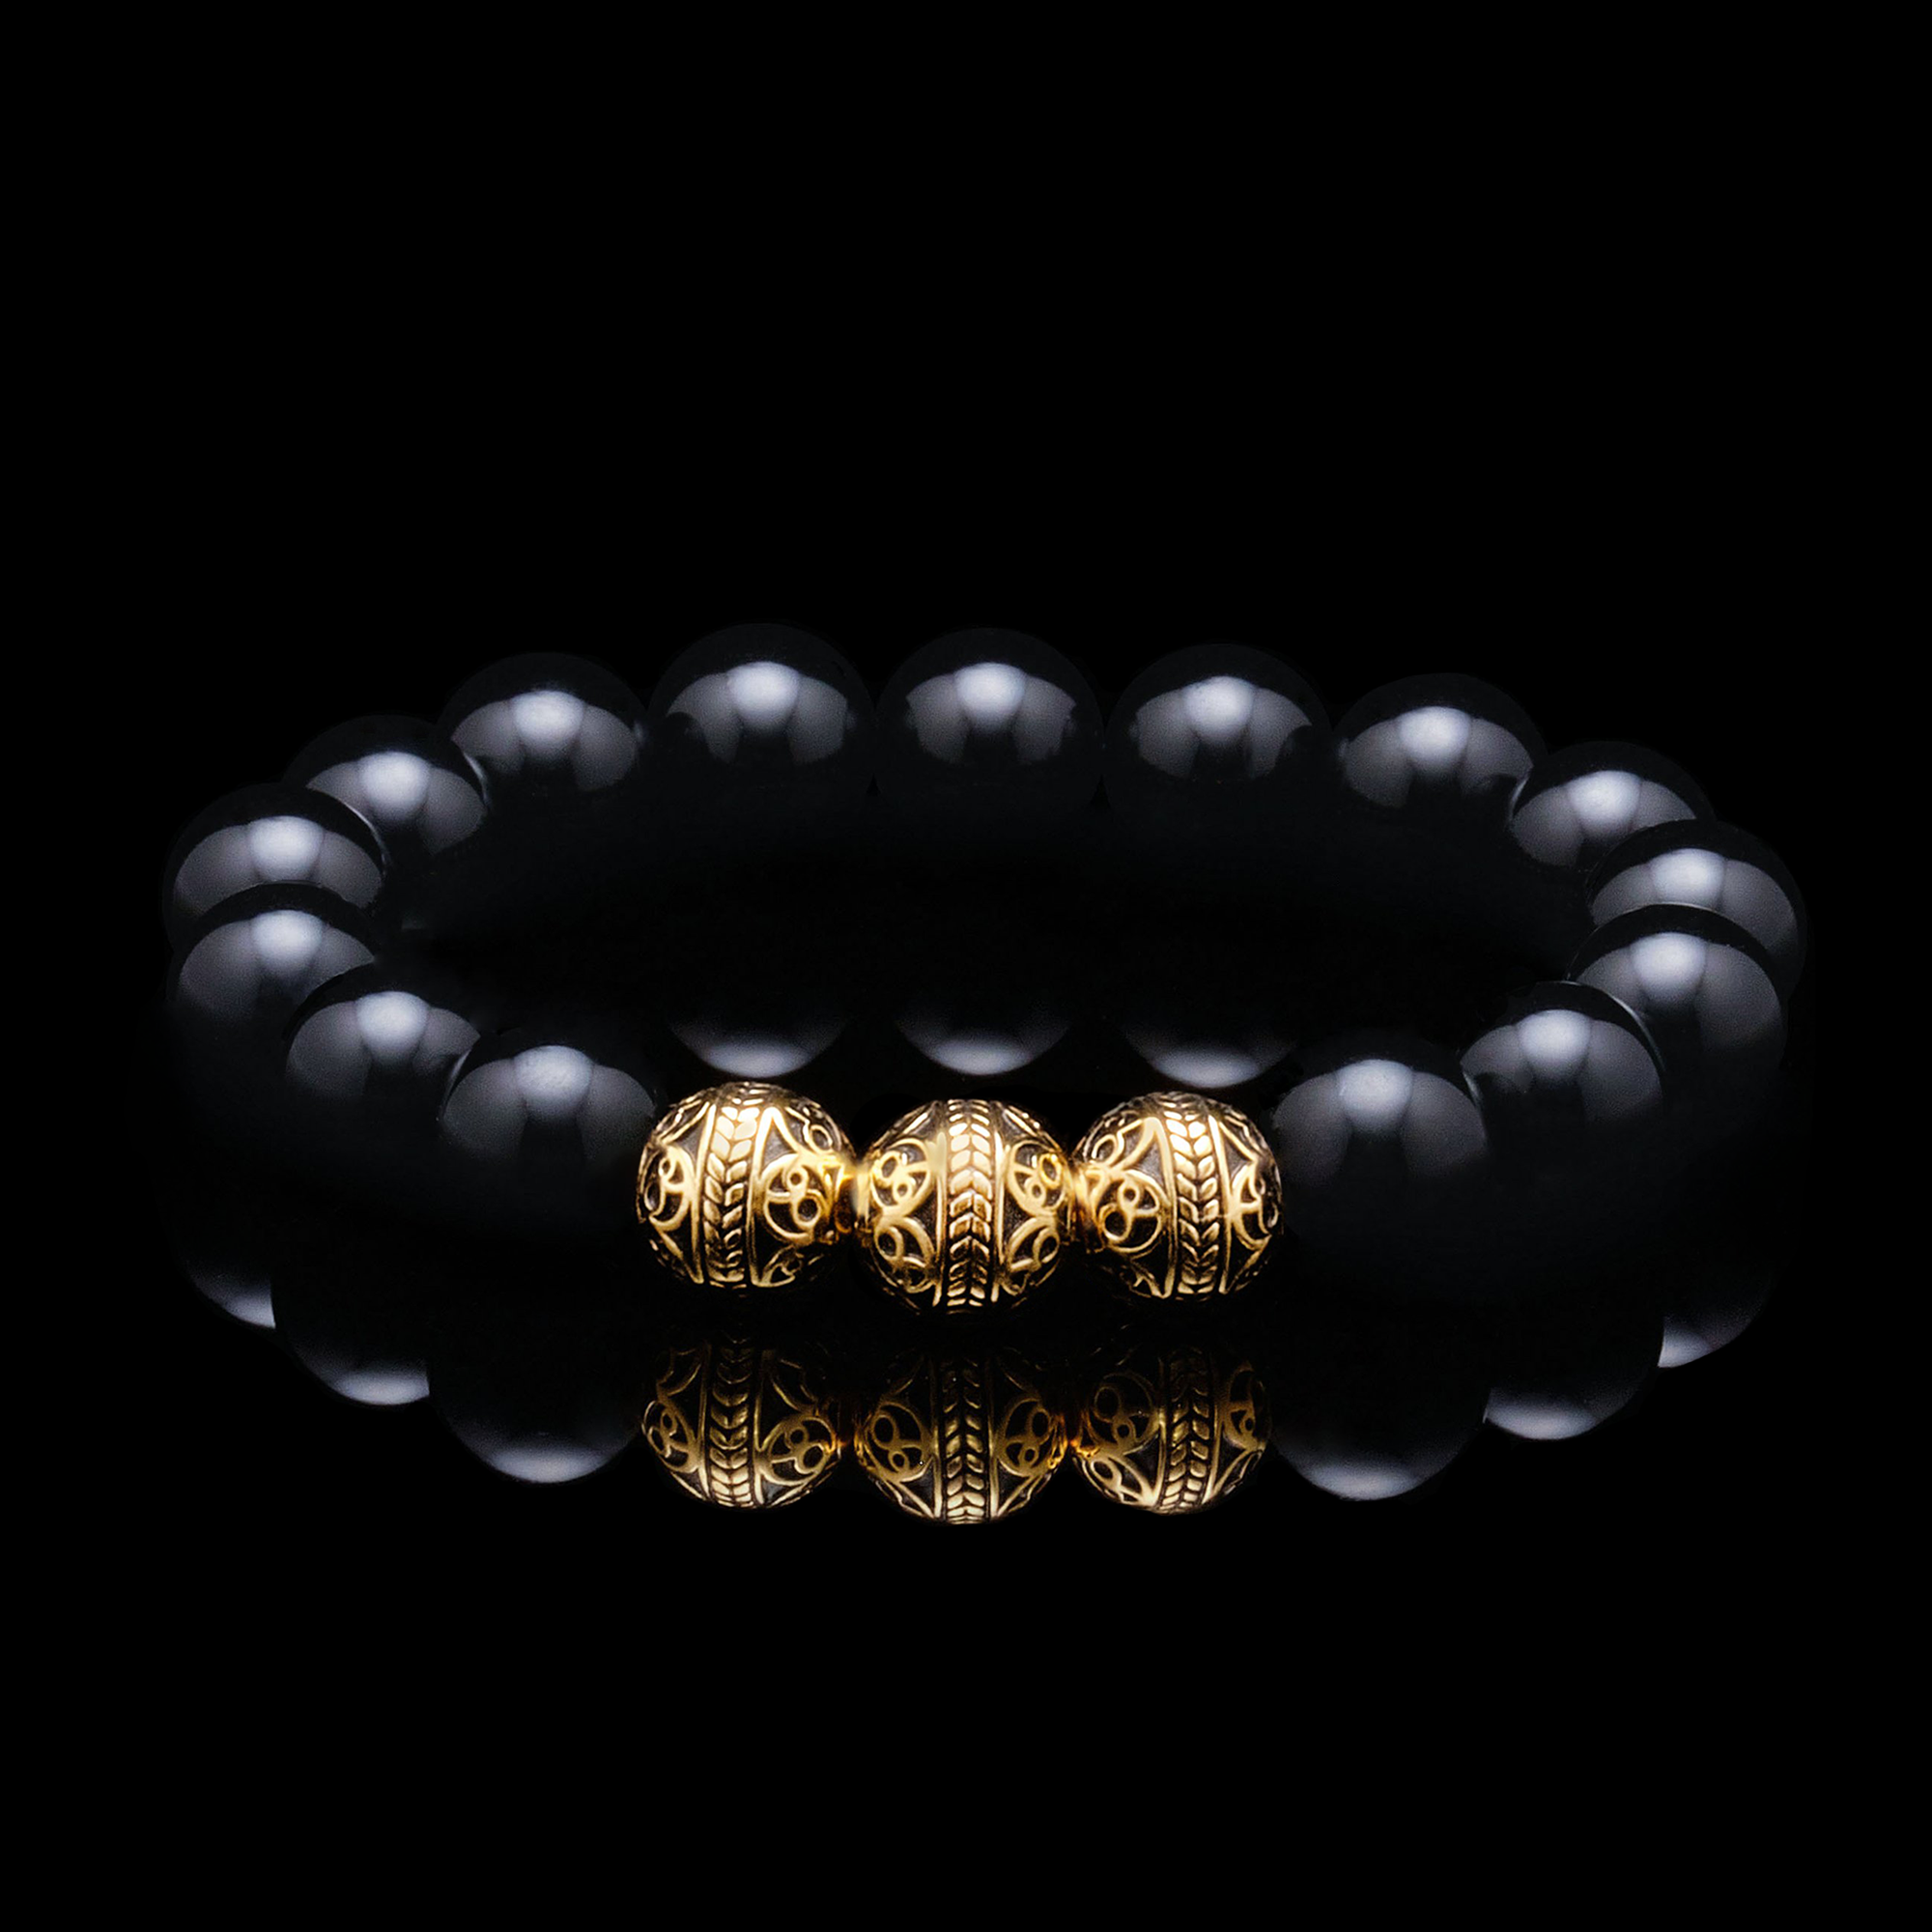 Men's jewellery: bracelets and accessories for him